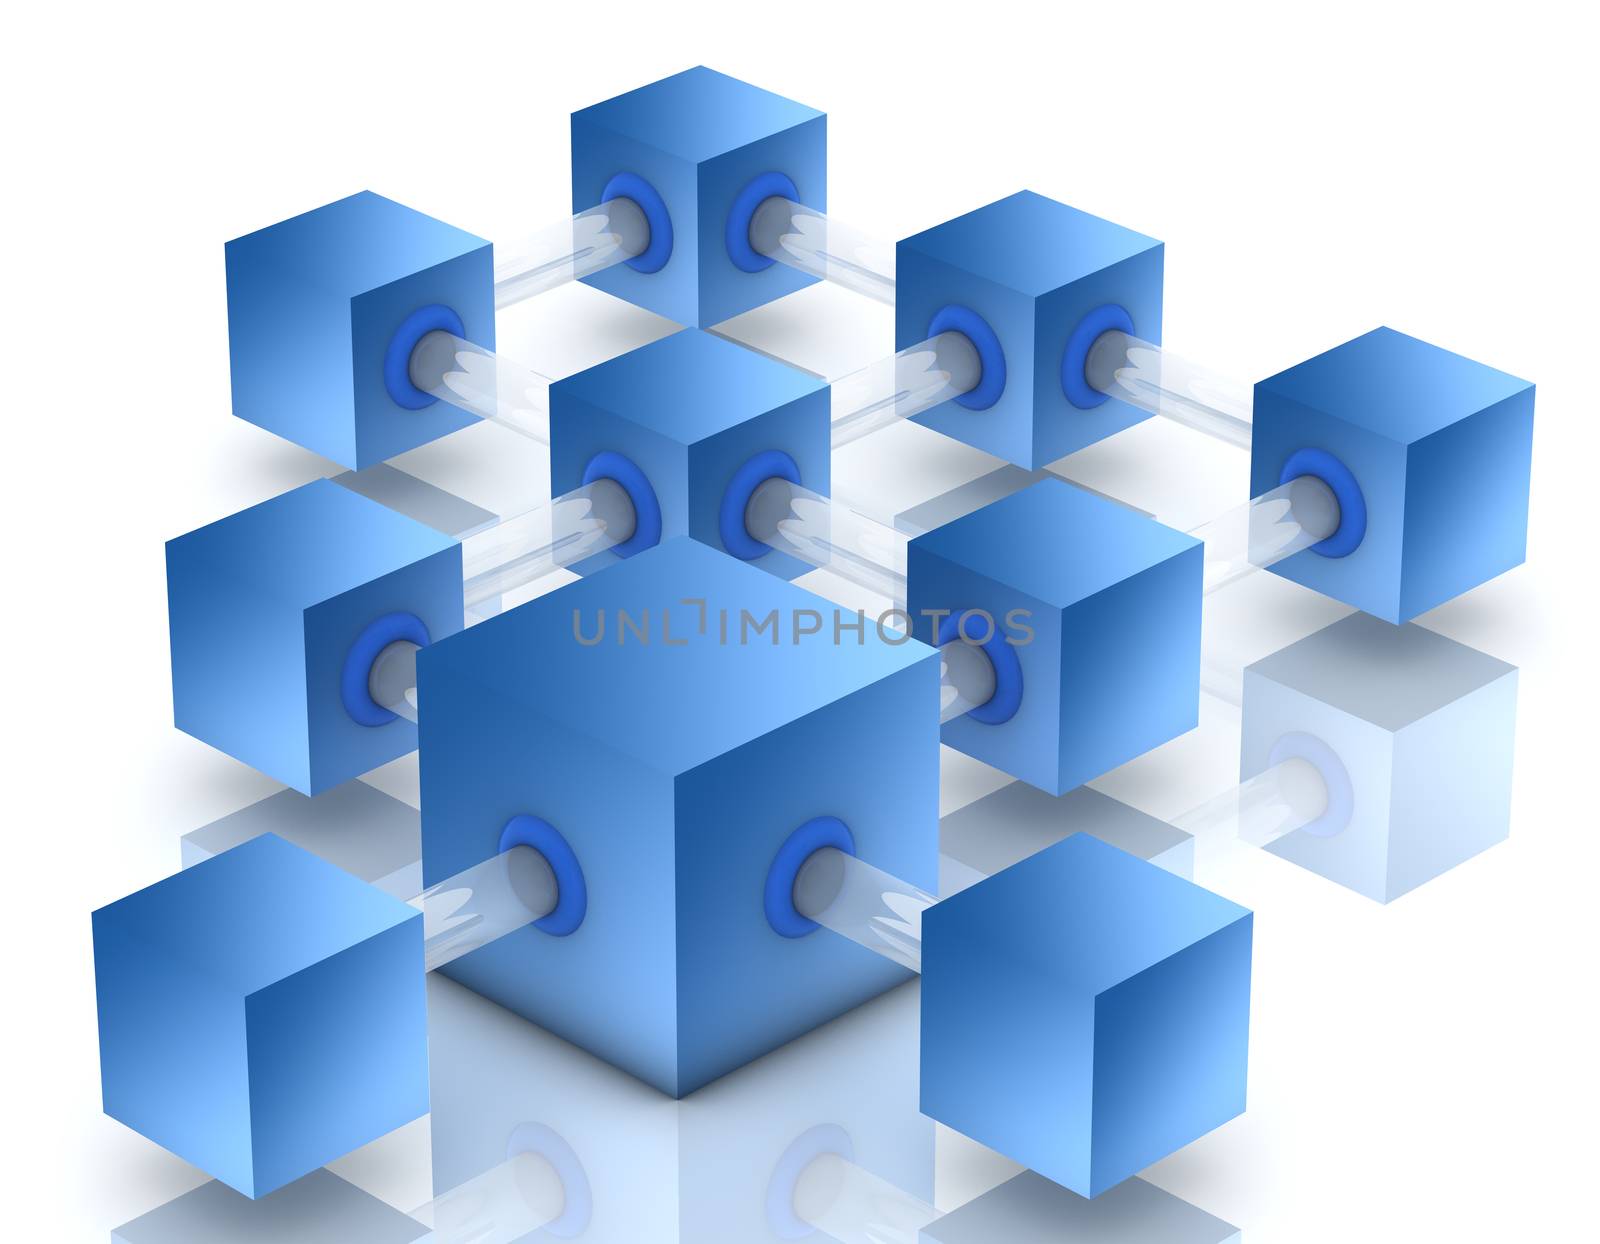 Abstract 3d network concept illustration on white background